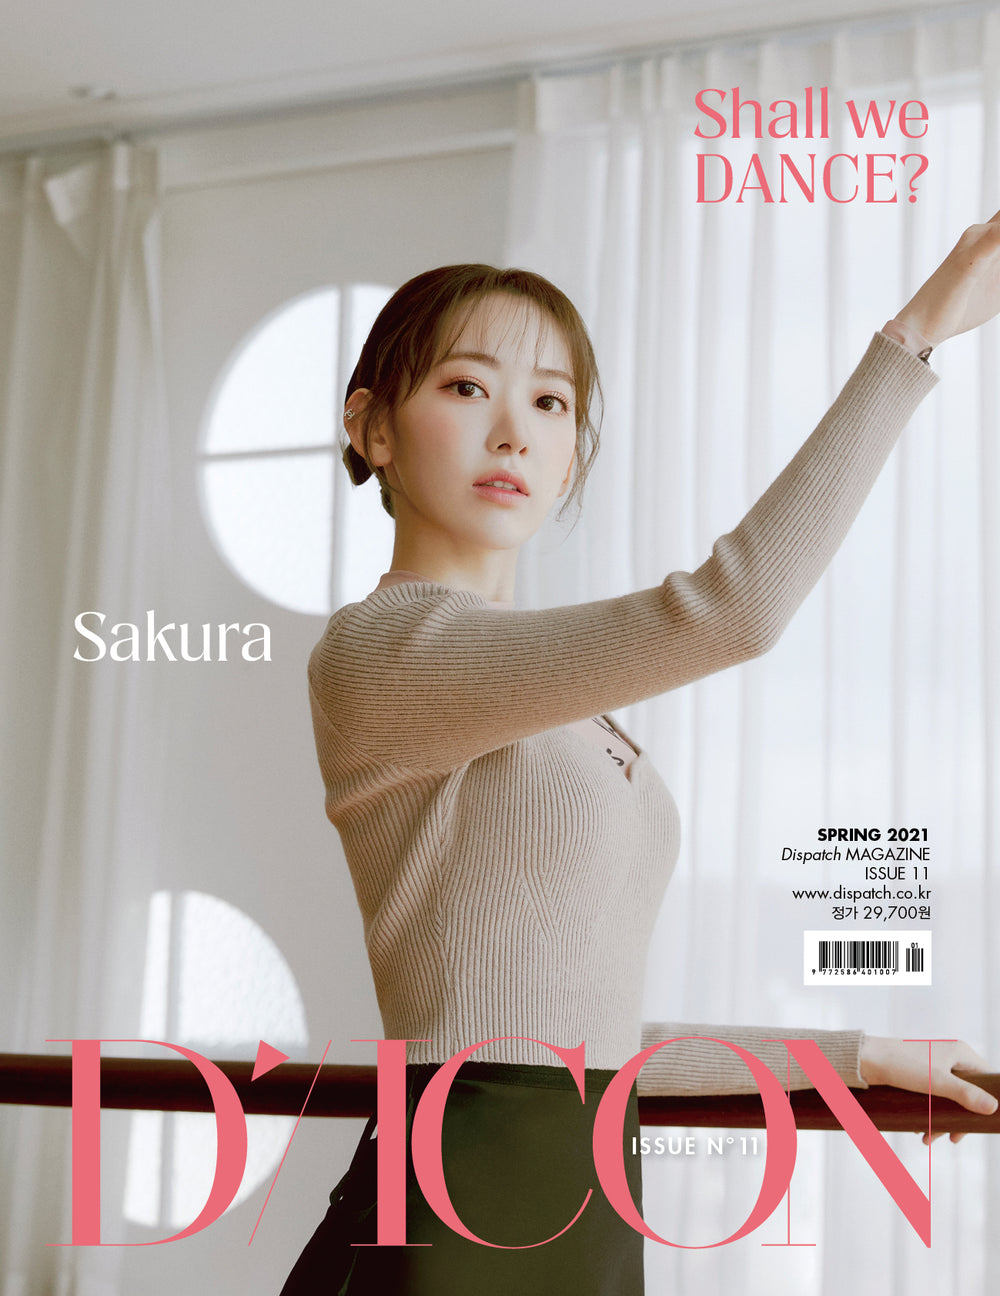 DICON ISSUE N°11 : SHALL WE DANCE A-type